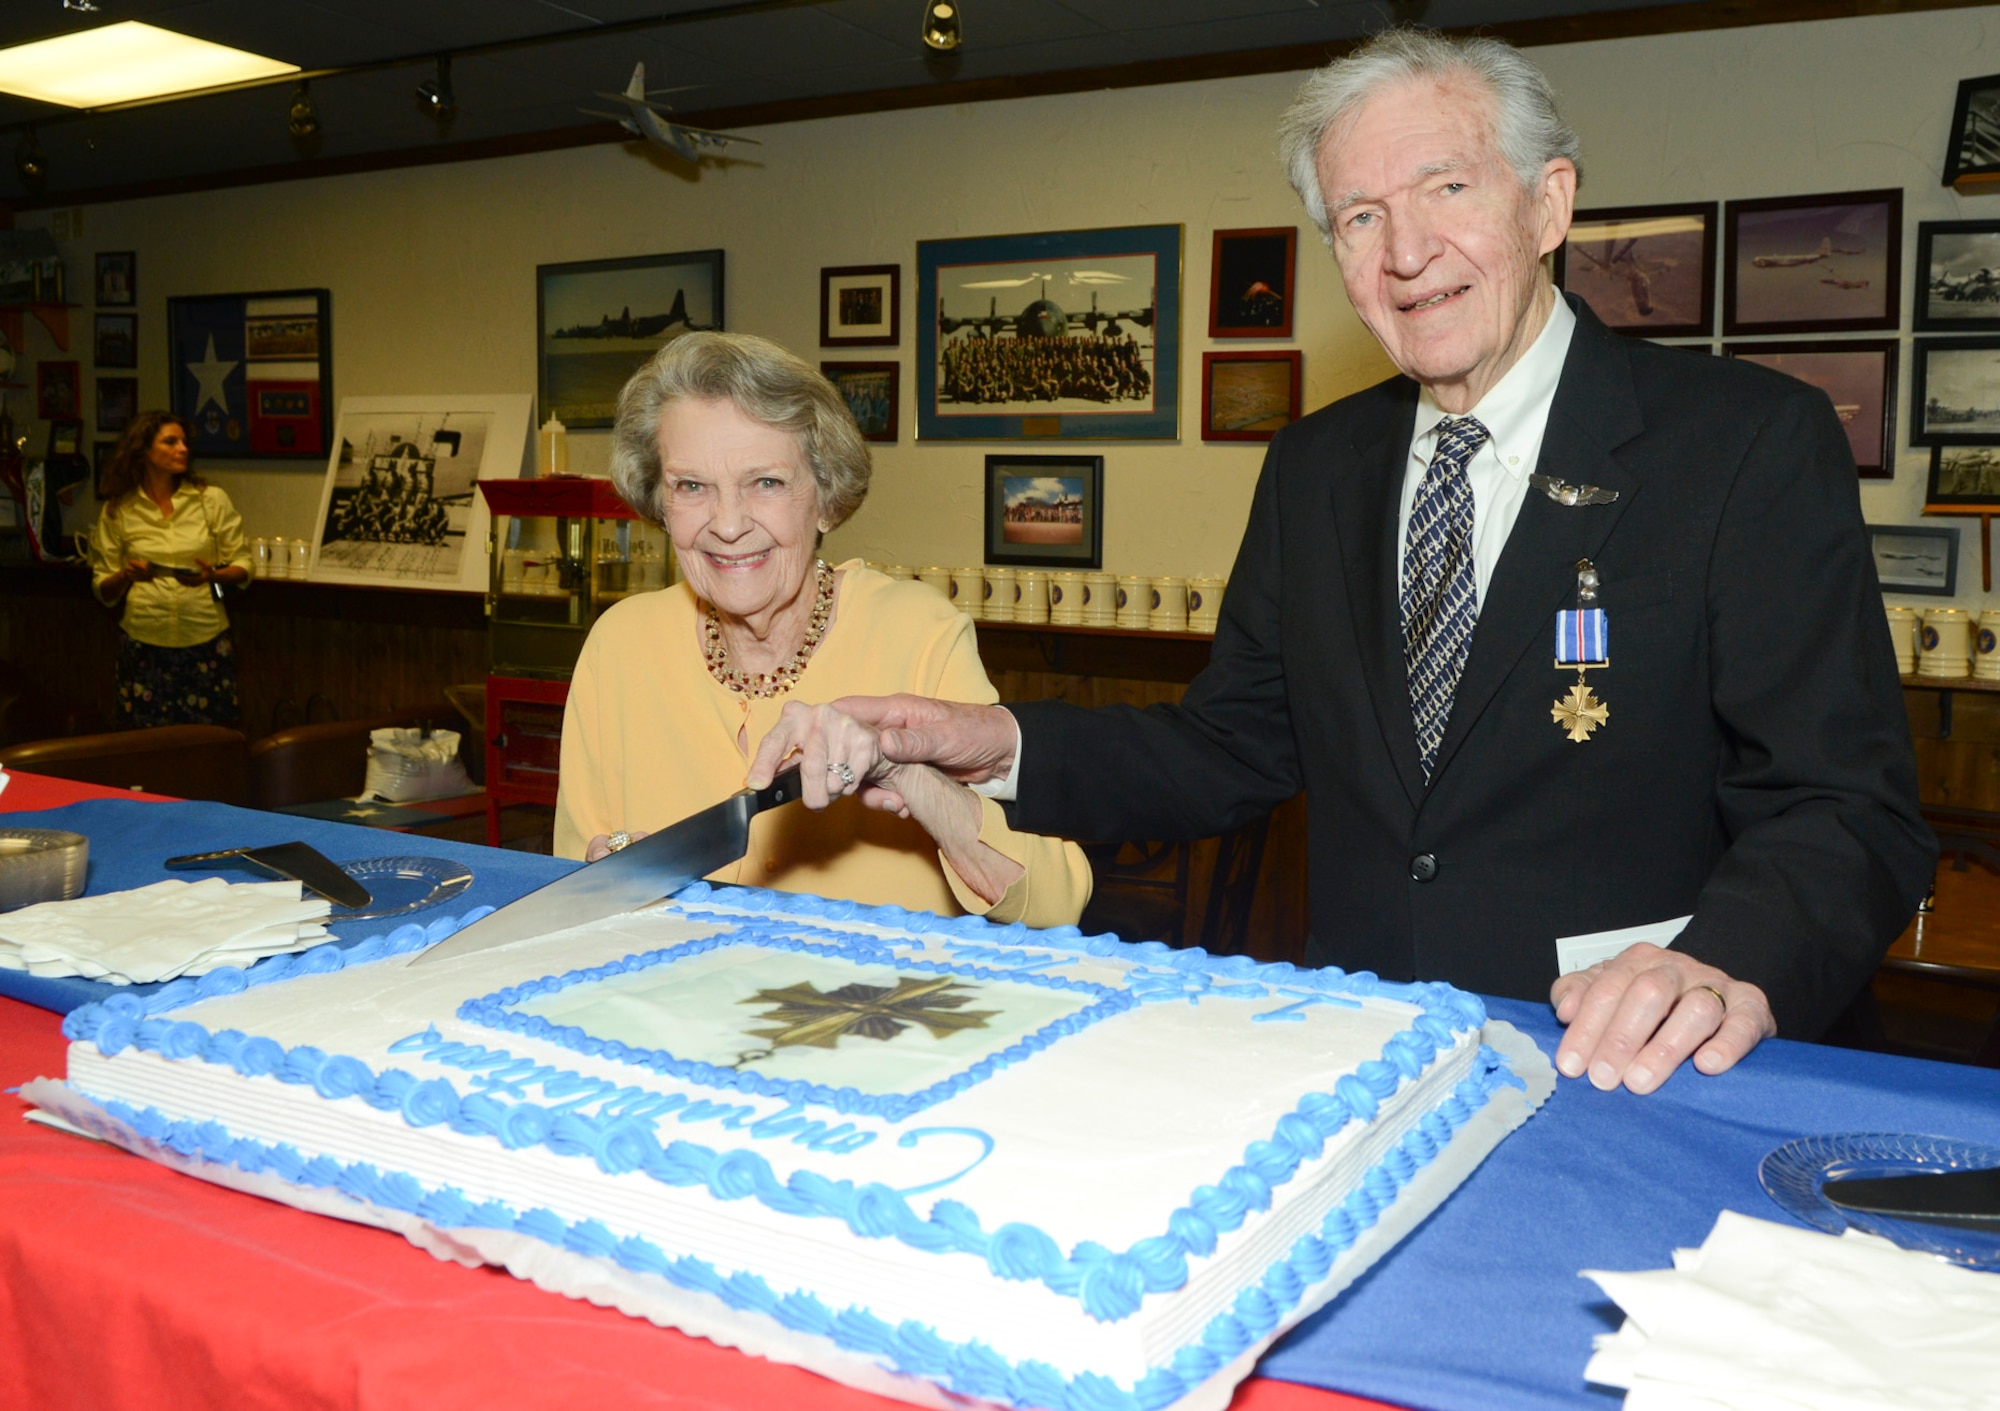 Thomas P. Faulkner, a former pilot and 1st. Lt. of the U.S. Army Air Forces’ 15th Air Force, in Italy during WWII cuts the Distinguished Flying Cross cake with his wife in celebration of his award for his 28th mission at the age of 19. Faulkner, now 88 received his DFC 68 years after the fact at the 136th Airlift Wing, Naval Air Station Fort Worth Joint Reserve Base, Texas, Sept. 19, 2013. (Air National Guard photo by Senior Master Sgt. Elizabeth Gilbert/released)